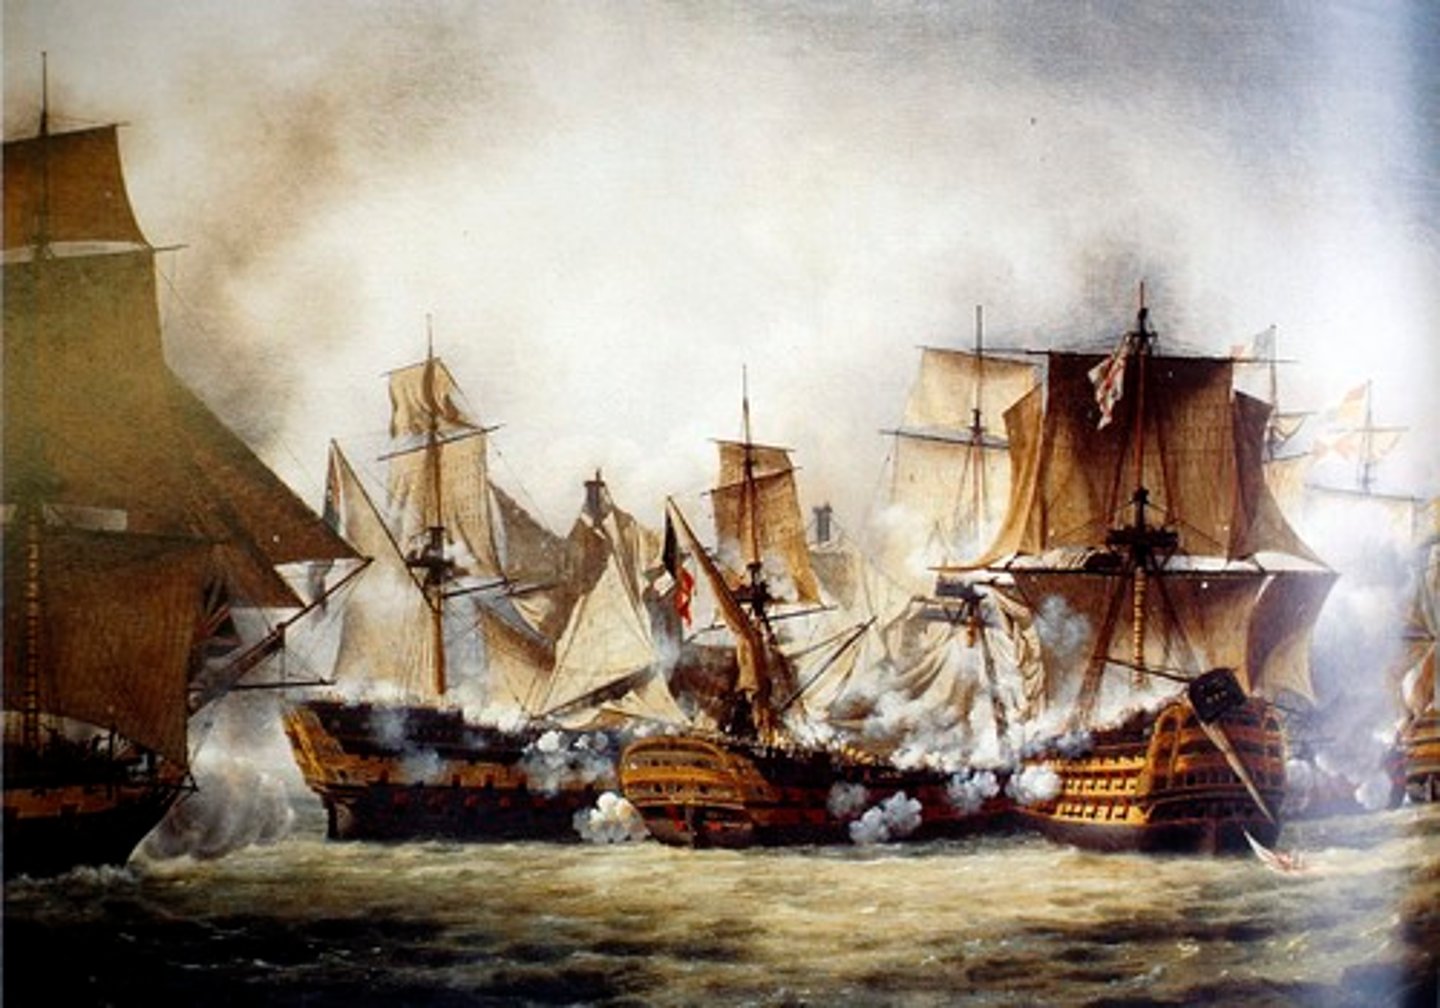 <p>a naval battle in 1805 where the British Royal Navy, under Admiral Nelson, defeated the combined French and Spanish fleets. It prevented Napoleon from invading Britain and secured British naval supremacy.</p>